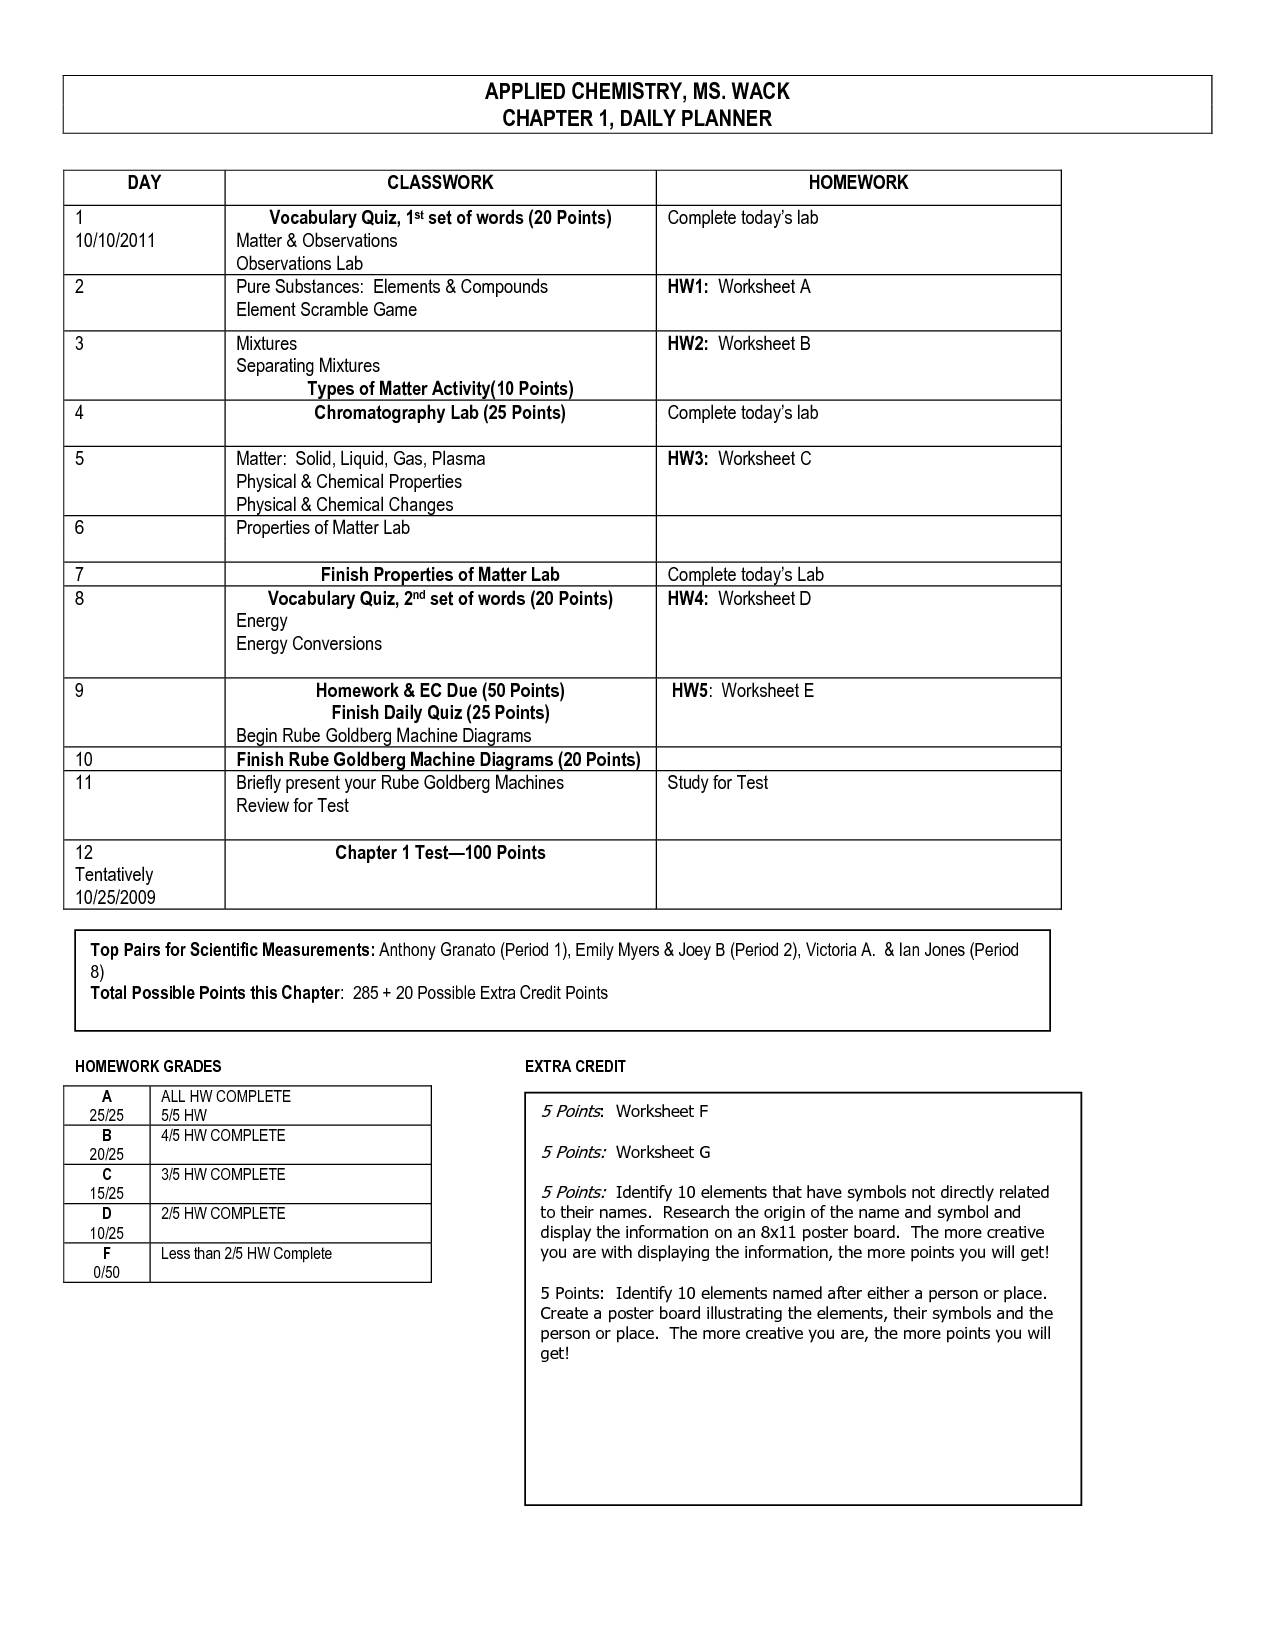 elements-compounds-and-mixtures-worksheets